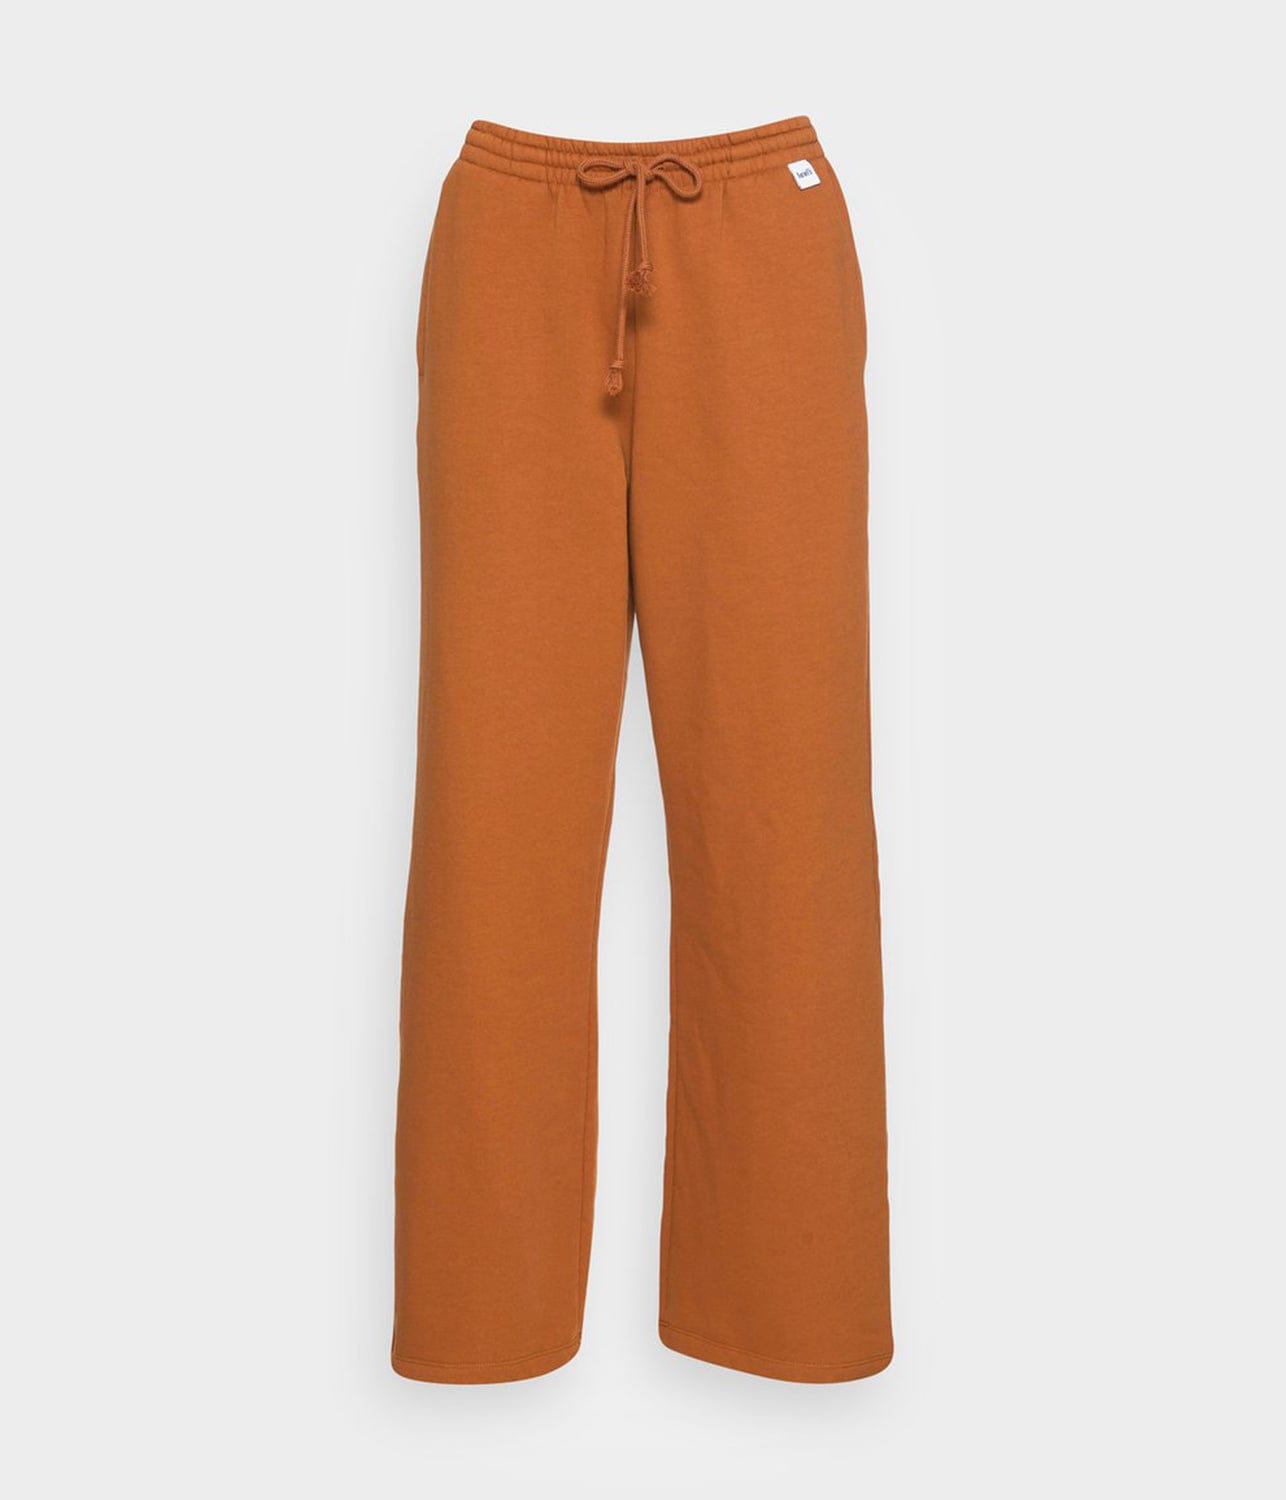 APARTMENT SWEATPANT - GLAZED GINGER | LEVIS – FOR ARTISTS ONLY